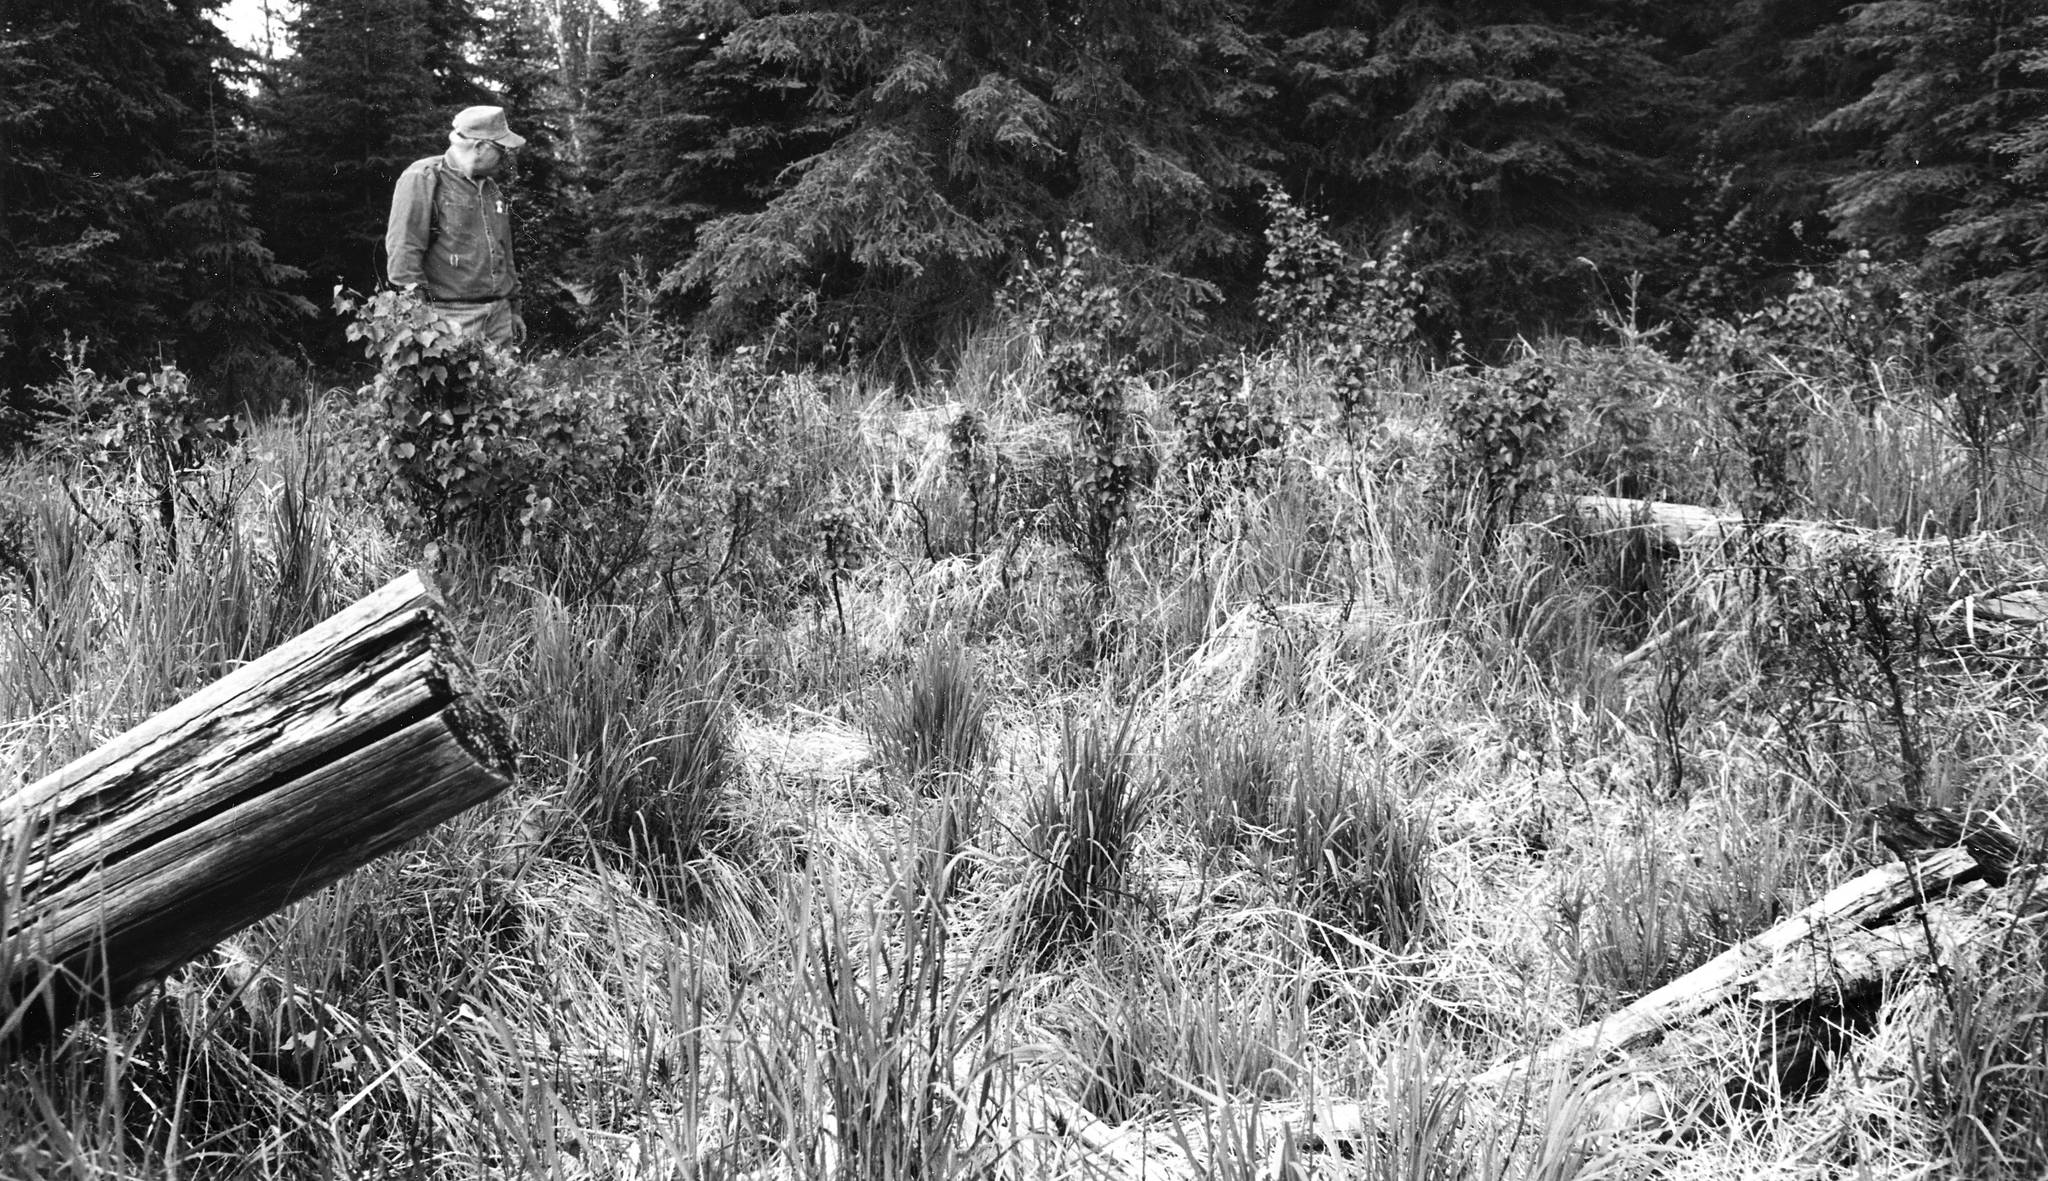 Photo by Clark Fair
Drew at King Country Creek cabin remains are pictured in 1999. All that remains of the last King County Creek cabin, just inland from Skilak Lake, are these well-weathered logs, which are difficult to find in the tall grass at that location. ()